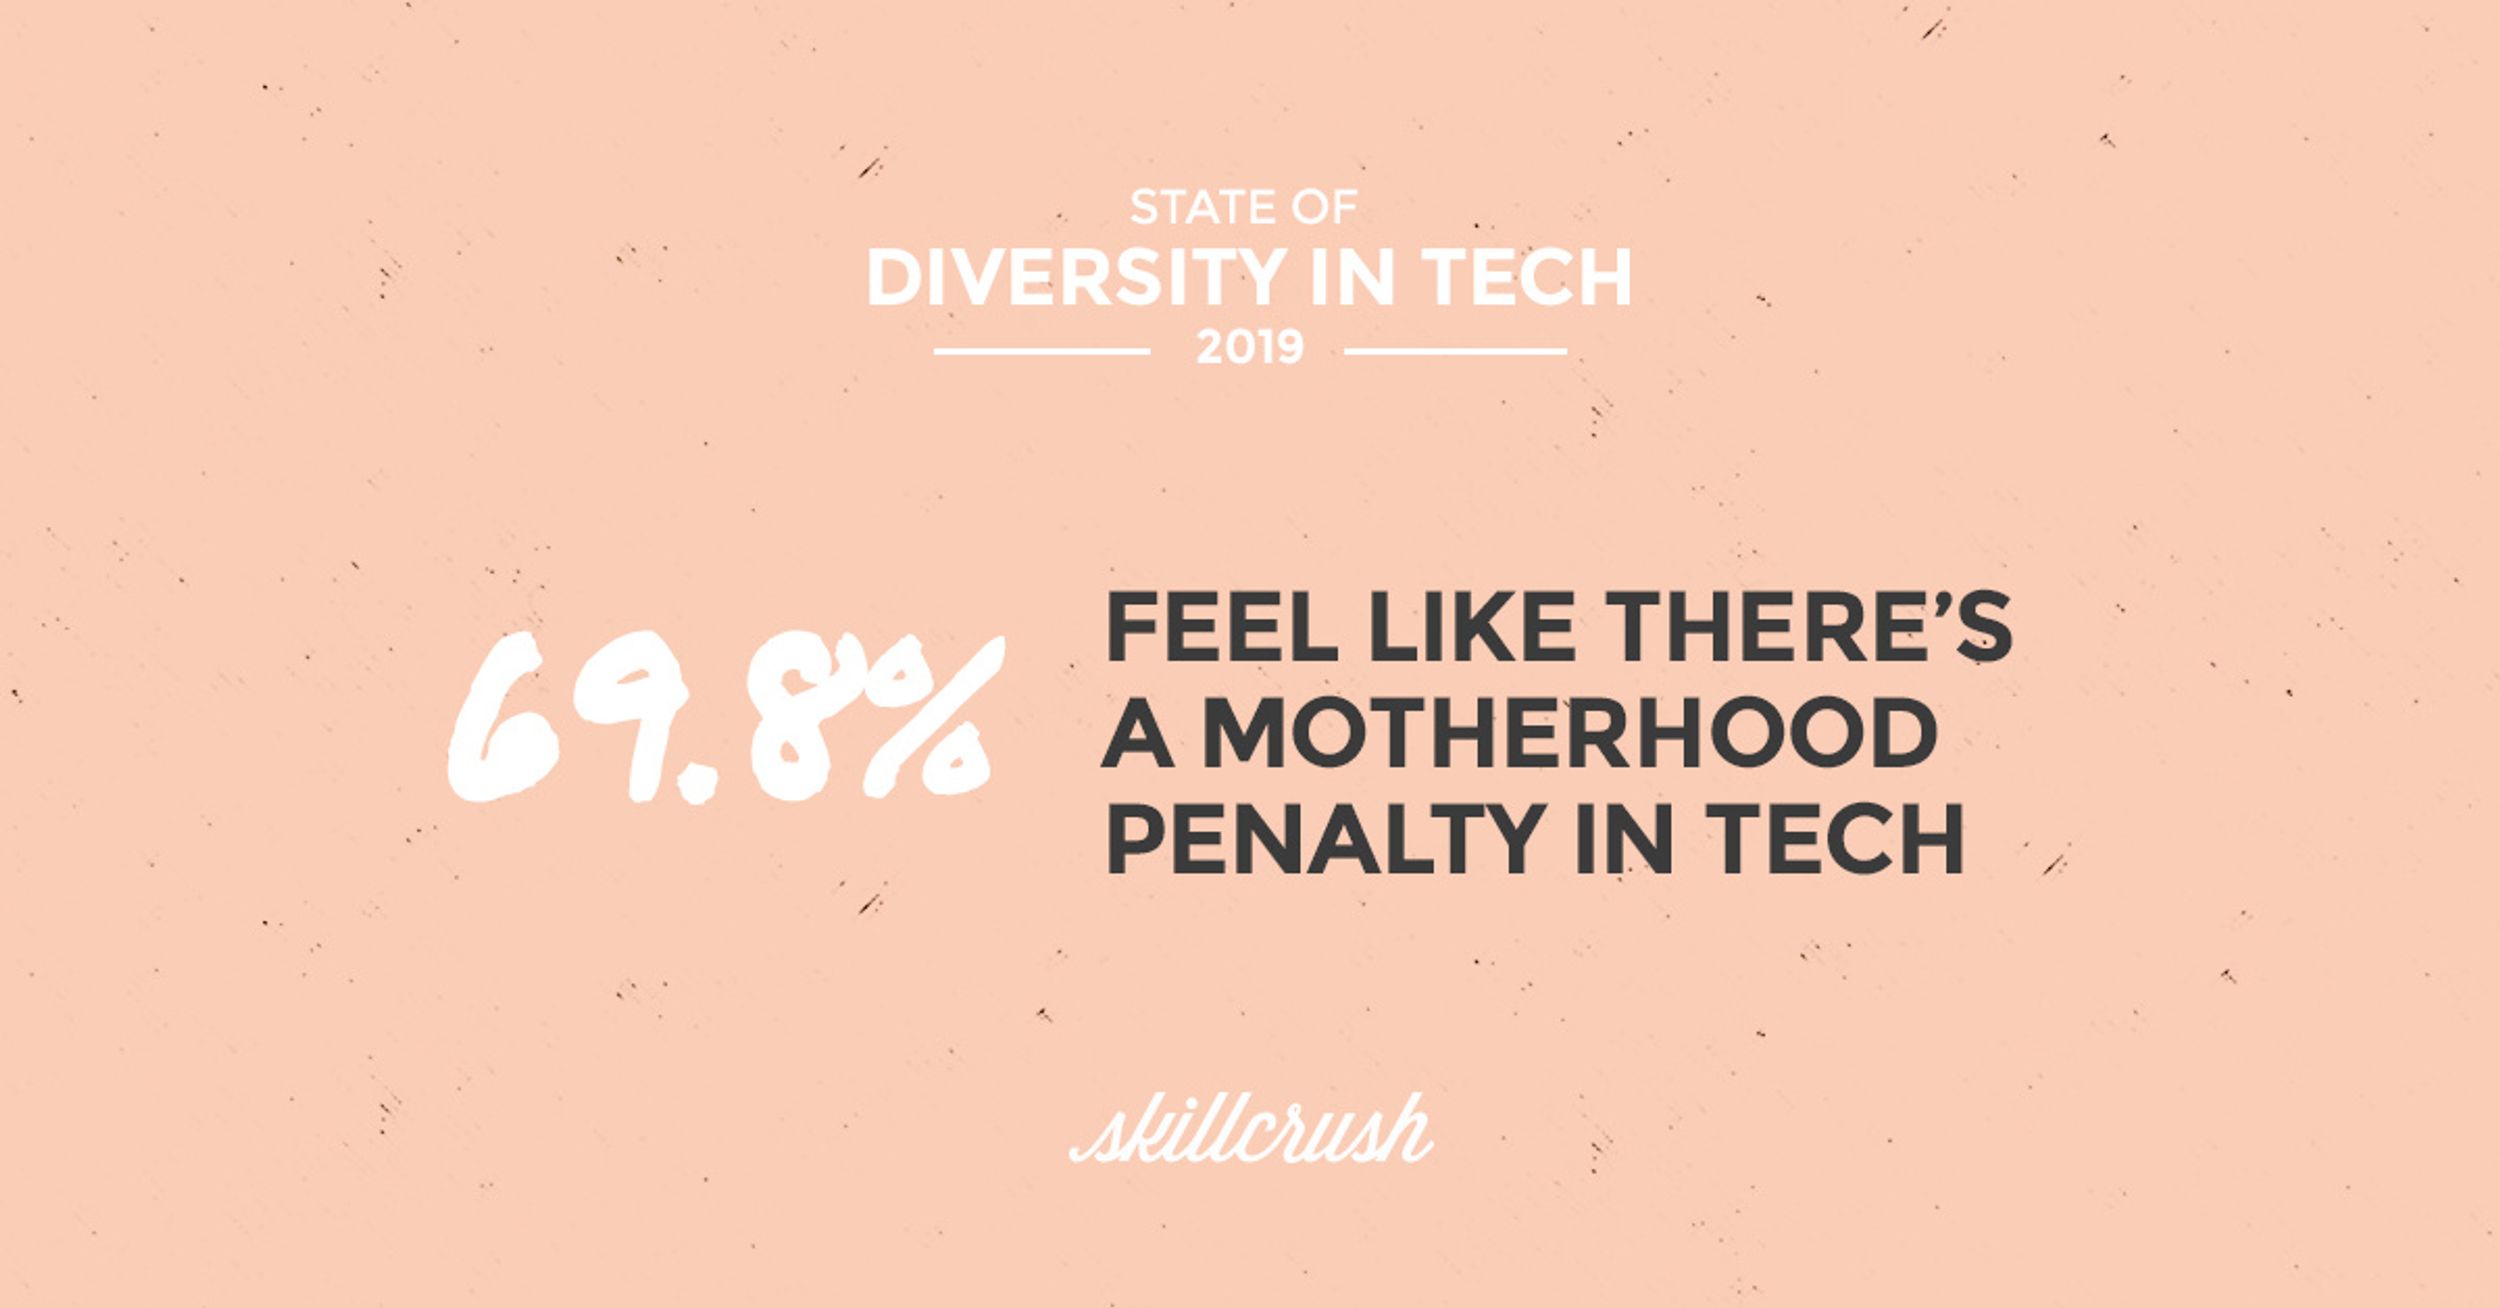 2019 Report: The State of Diversity in Tech by Skillcrush